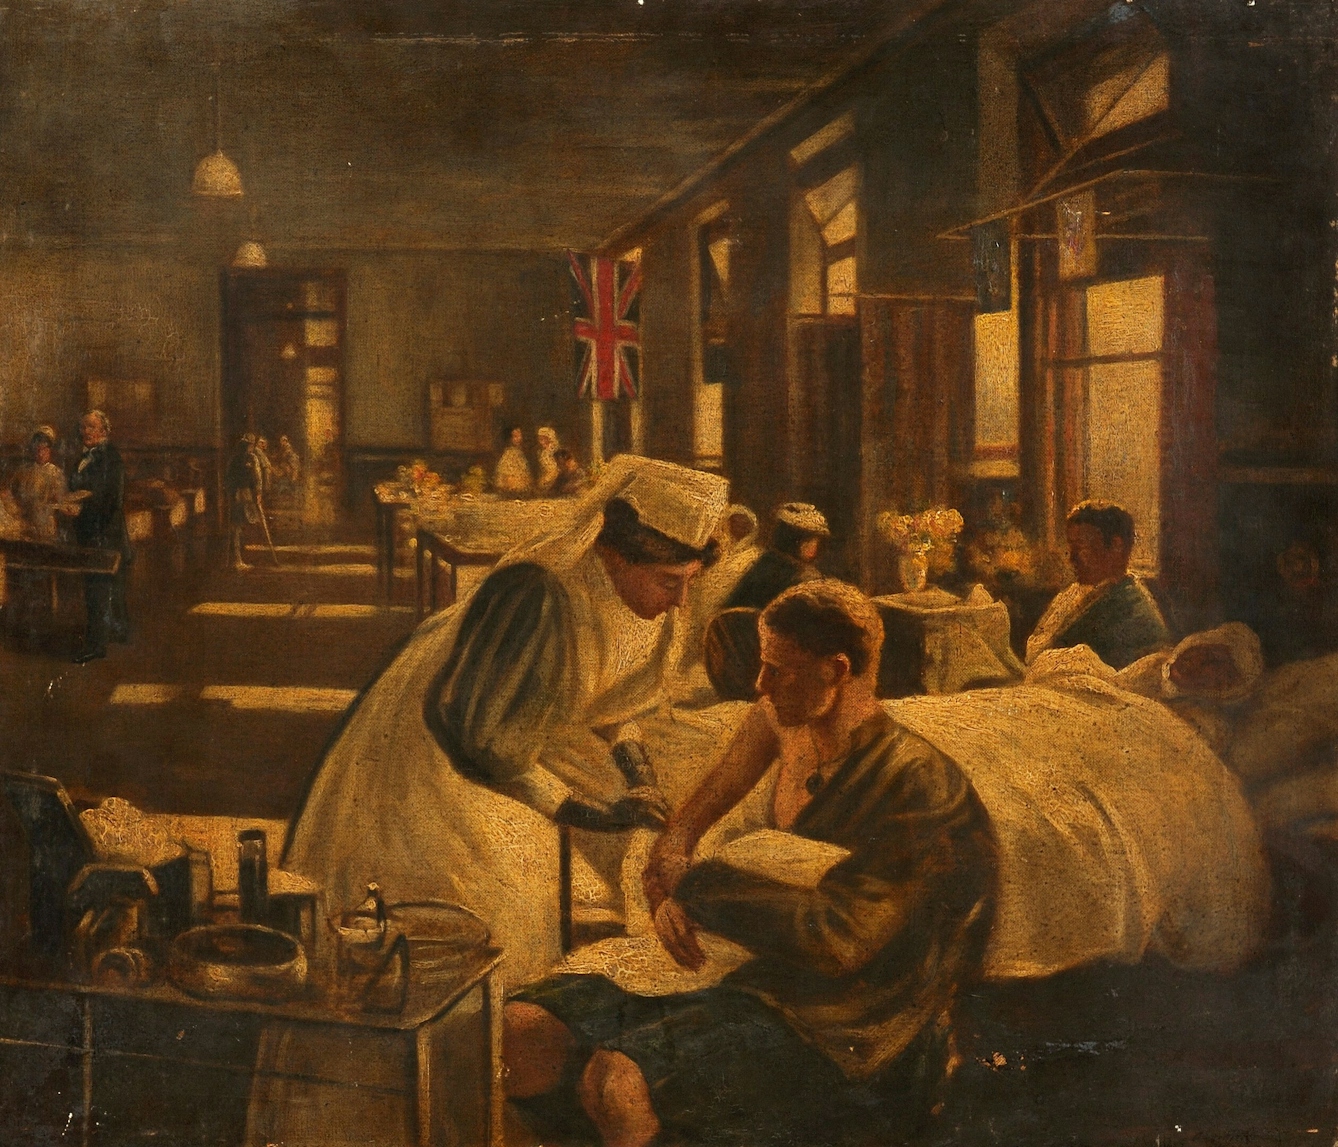 Colour painting of a hospital ward. A nurse tends to the arm of a seated man in the foreground. A large Union Jack flag hangs in the background.